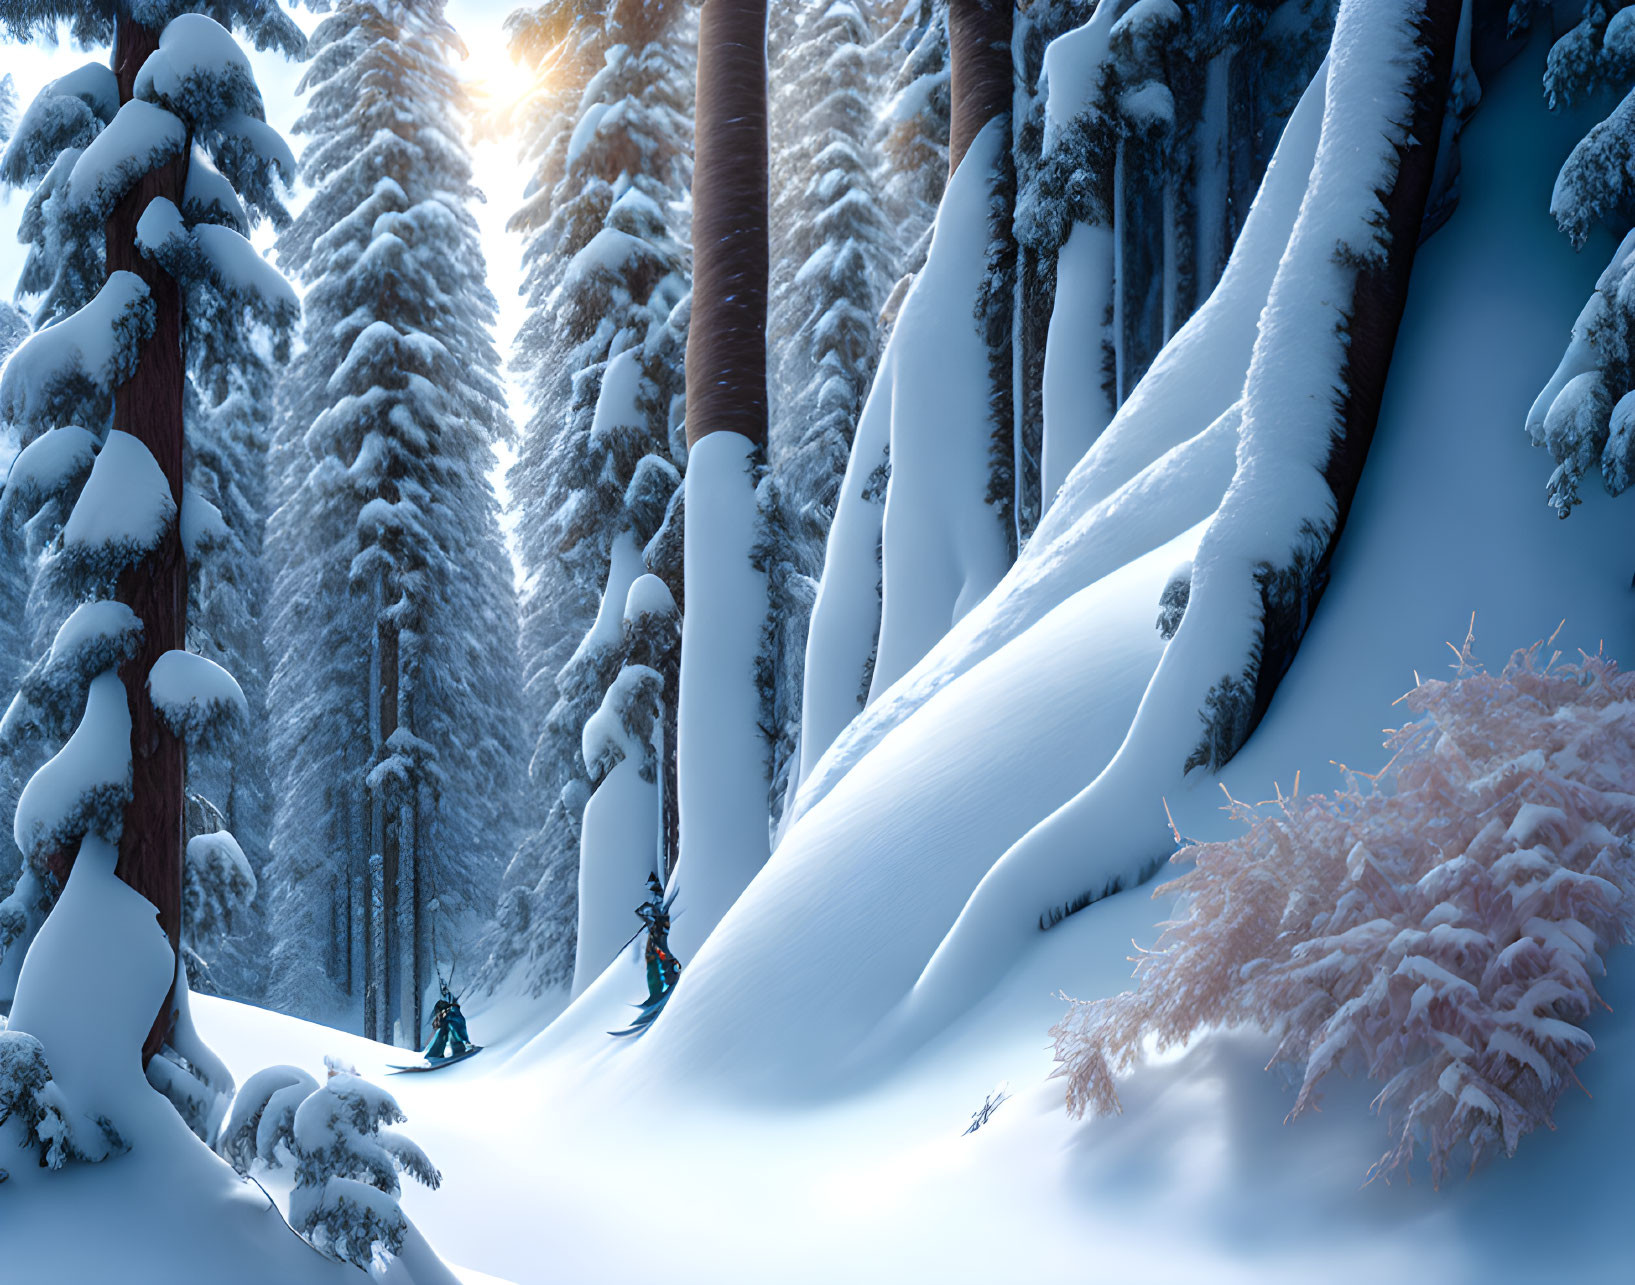 Snow-covered forest with skiers in tranquil clearing